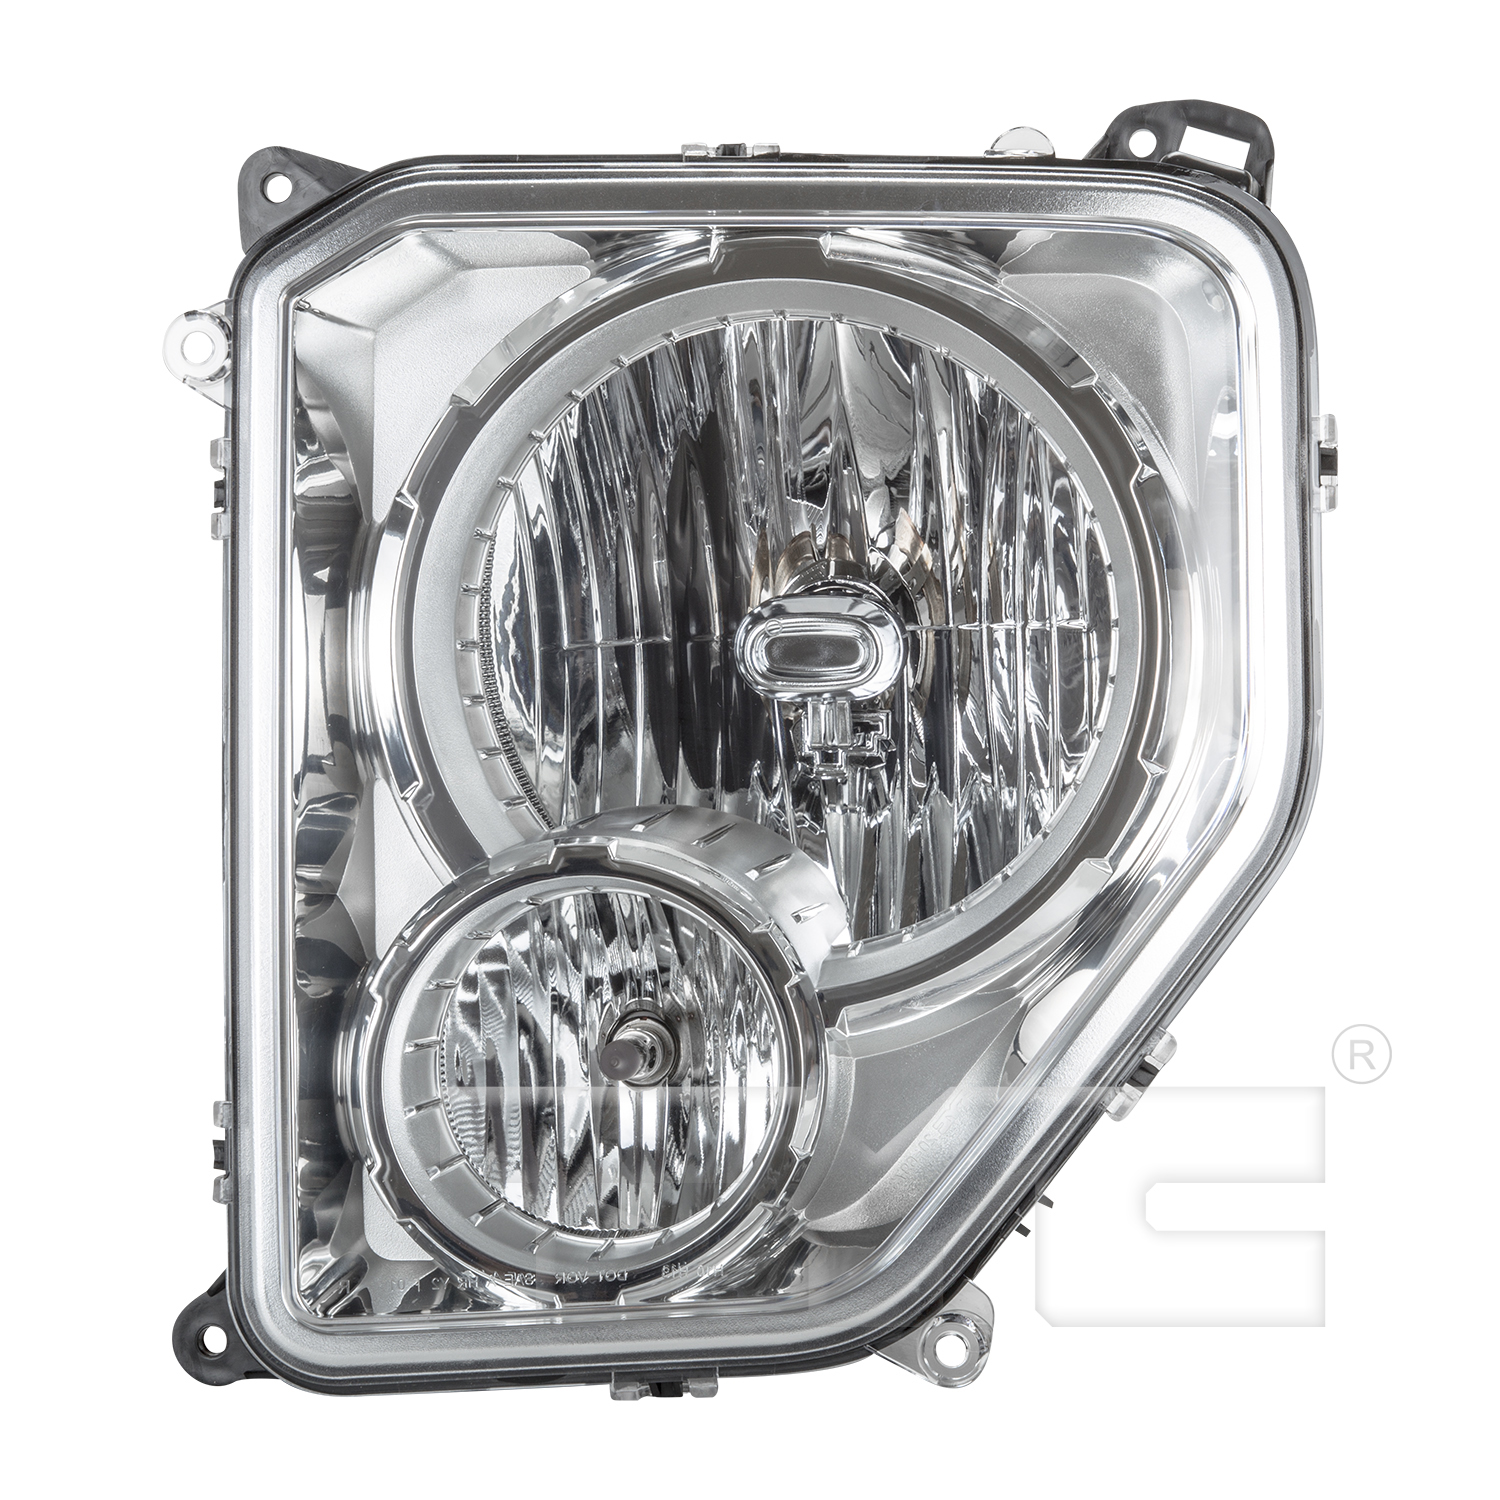 Aftermarket HEADLIGHTS for JEEP - LIBERTY, LIBERTY,08-12,LT Headlamp assy composite